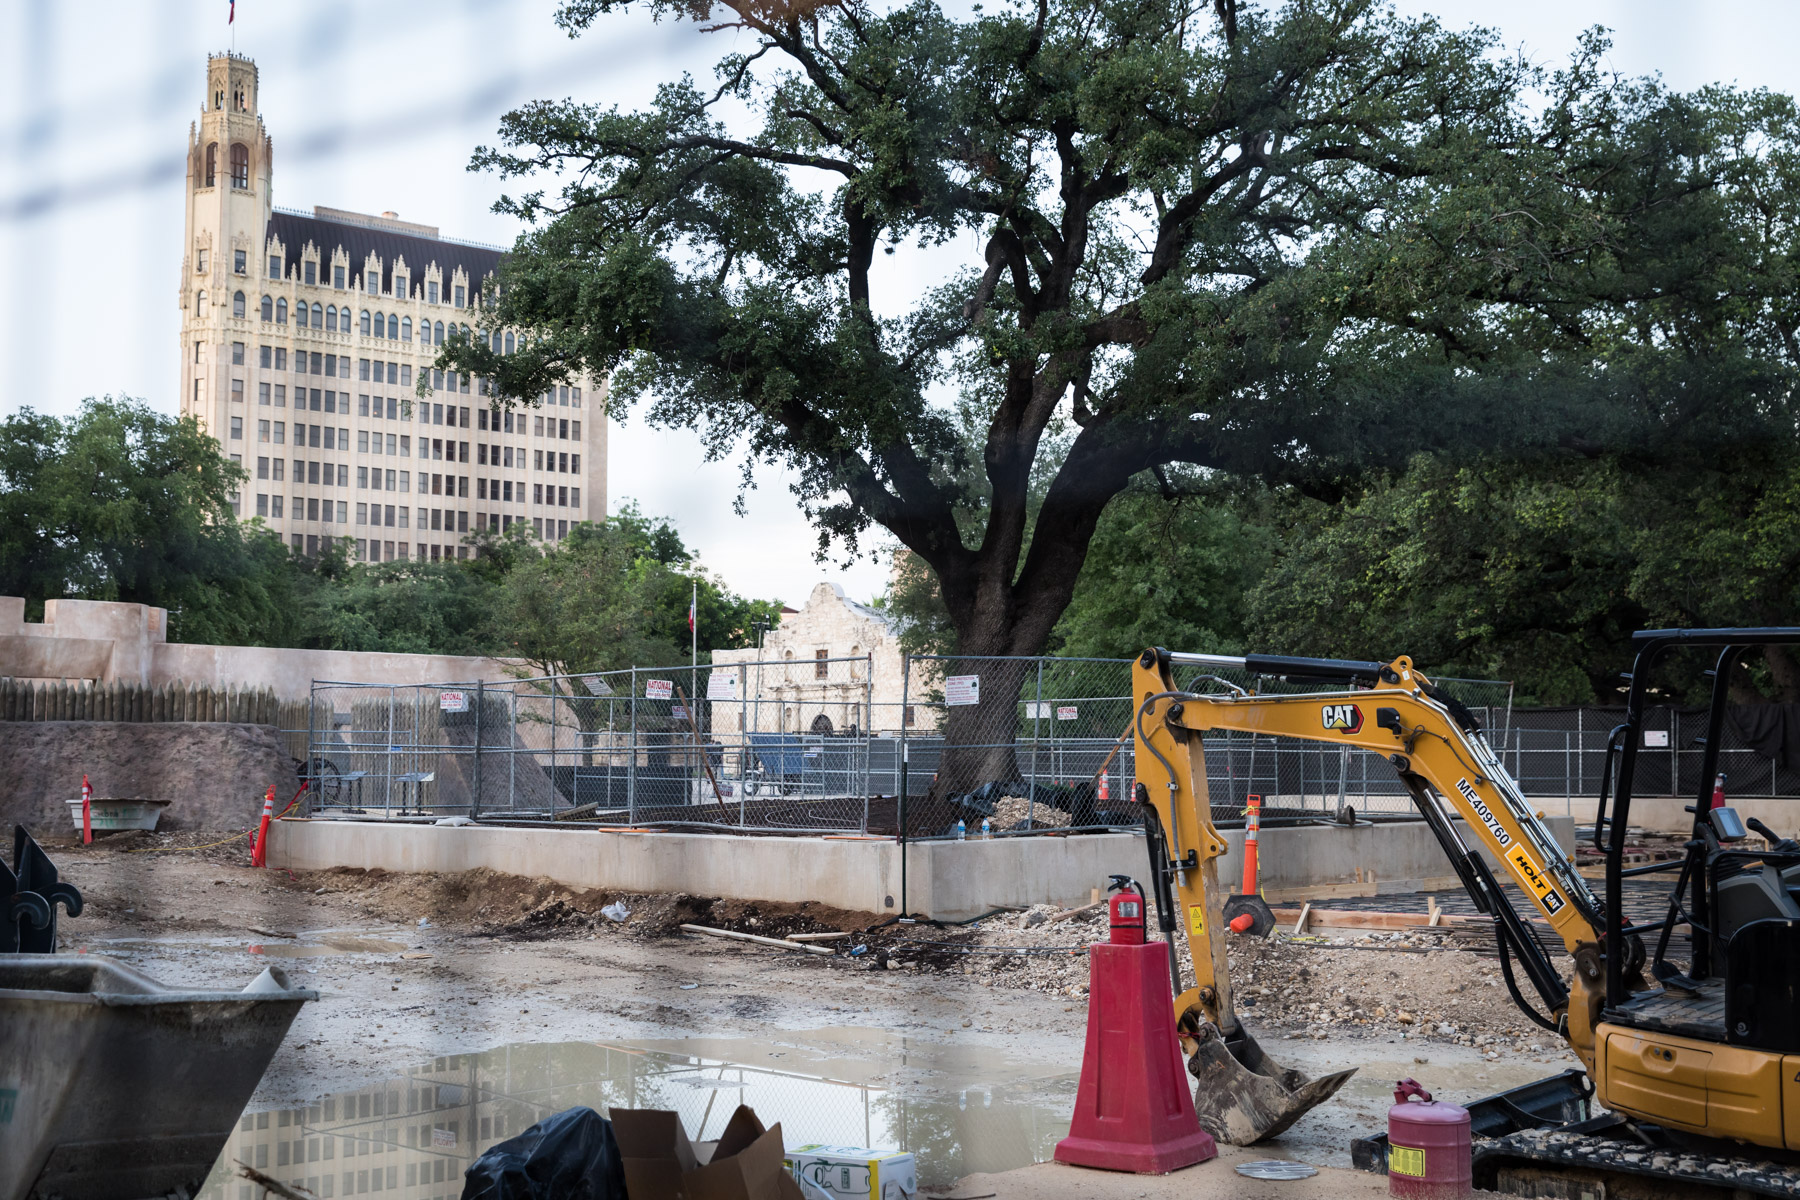 Construction in front of the Alamo for an article on the perfect downtown San Antonio family portrait itinerary